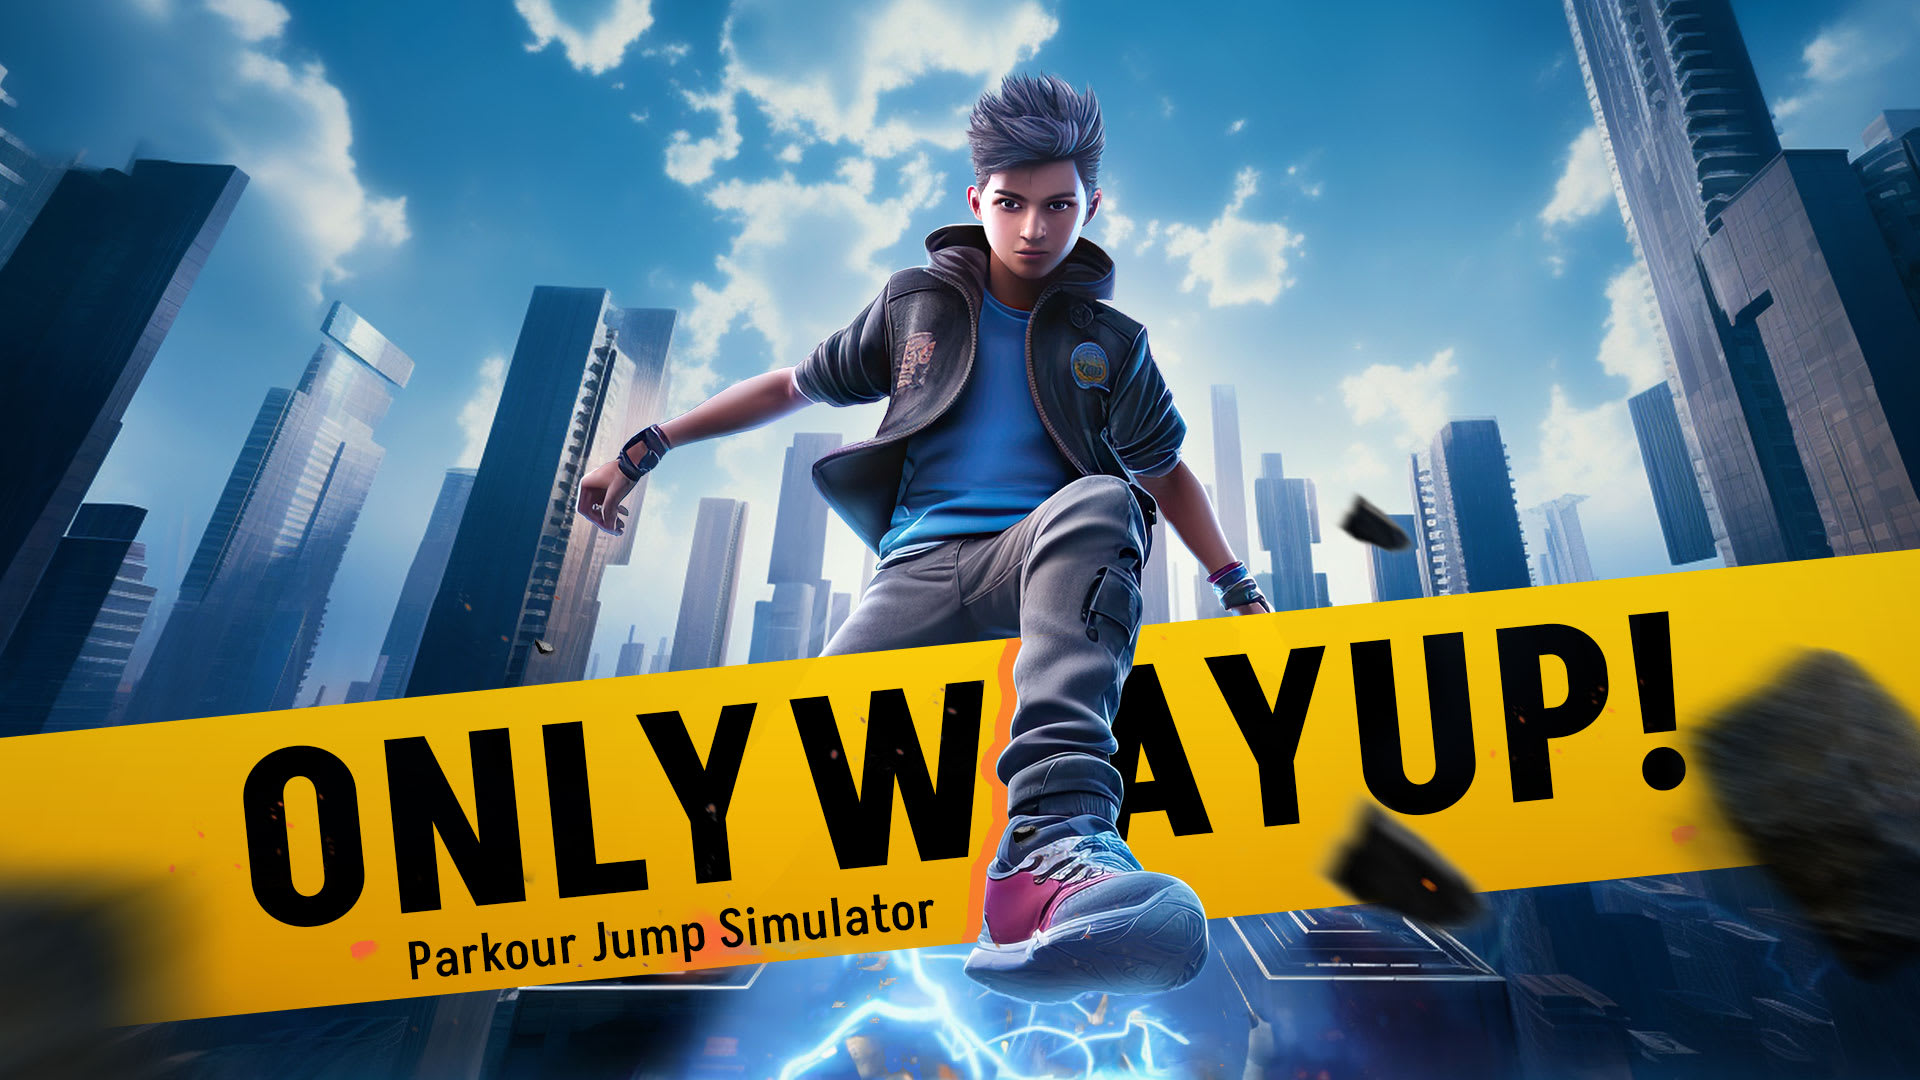 Only Way Up! Parkour Jump Simulator 1